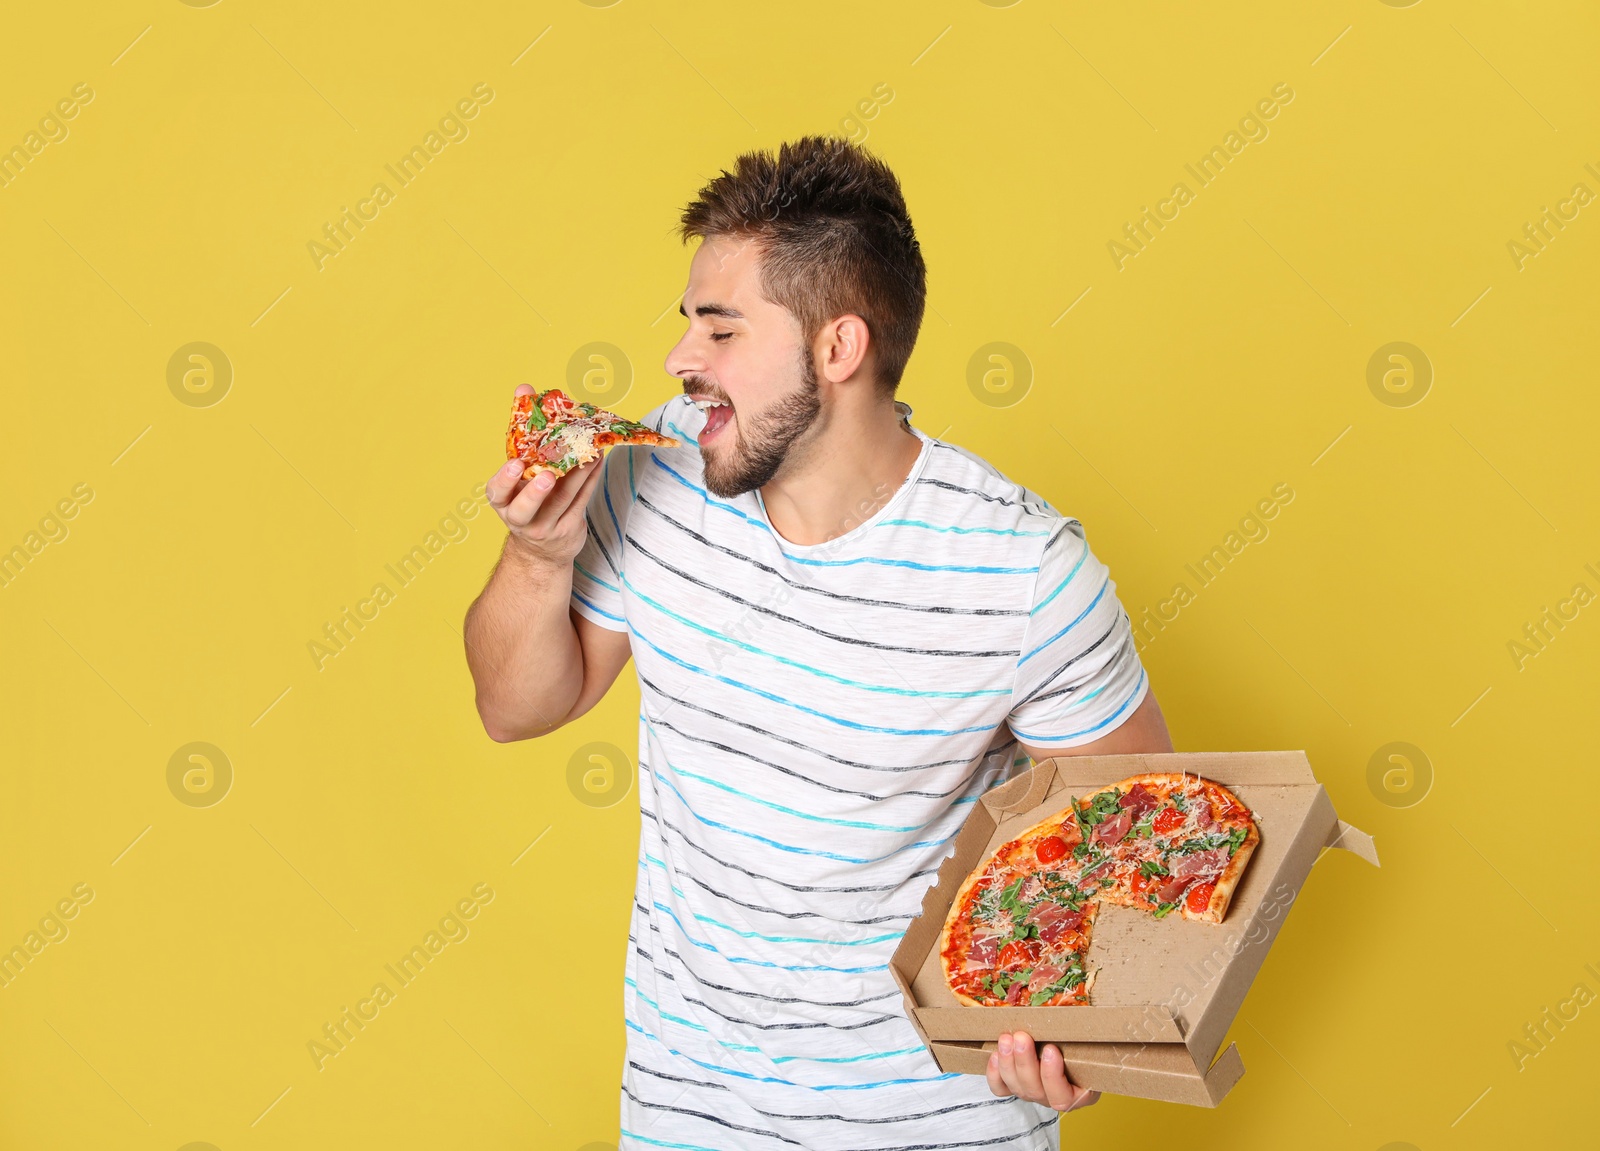 Photo of Handsome man eating tasty pizza on yellow background